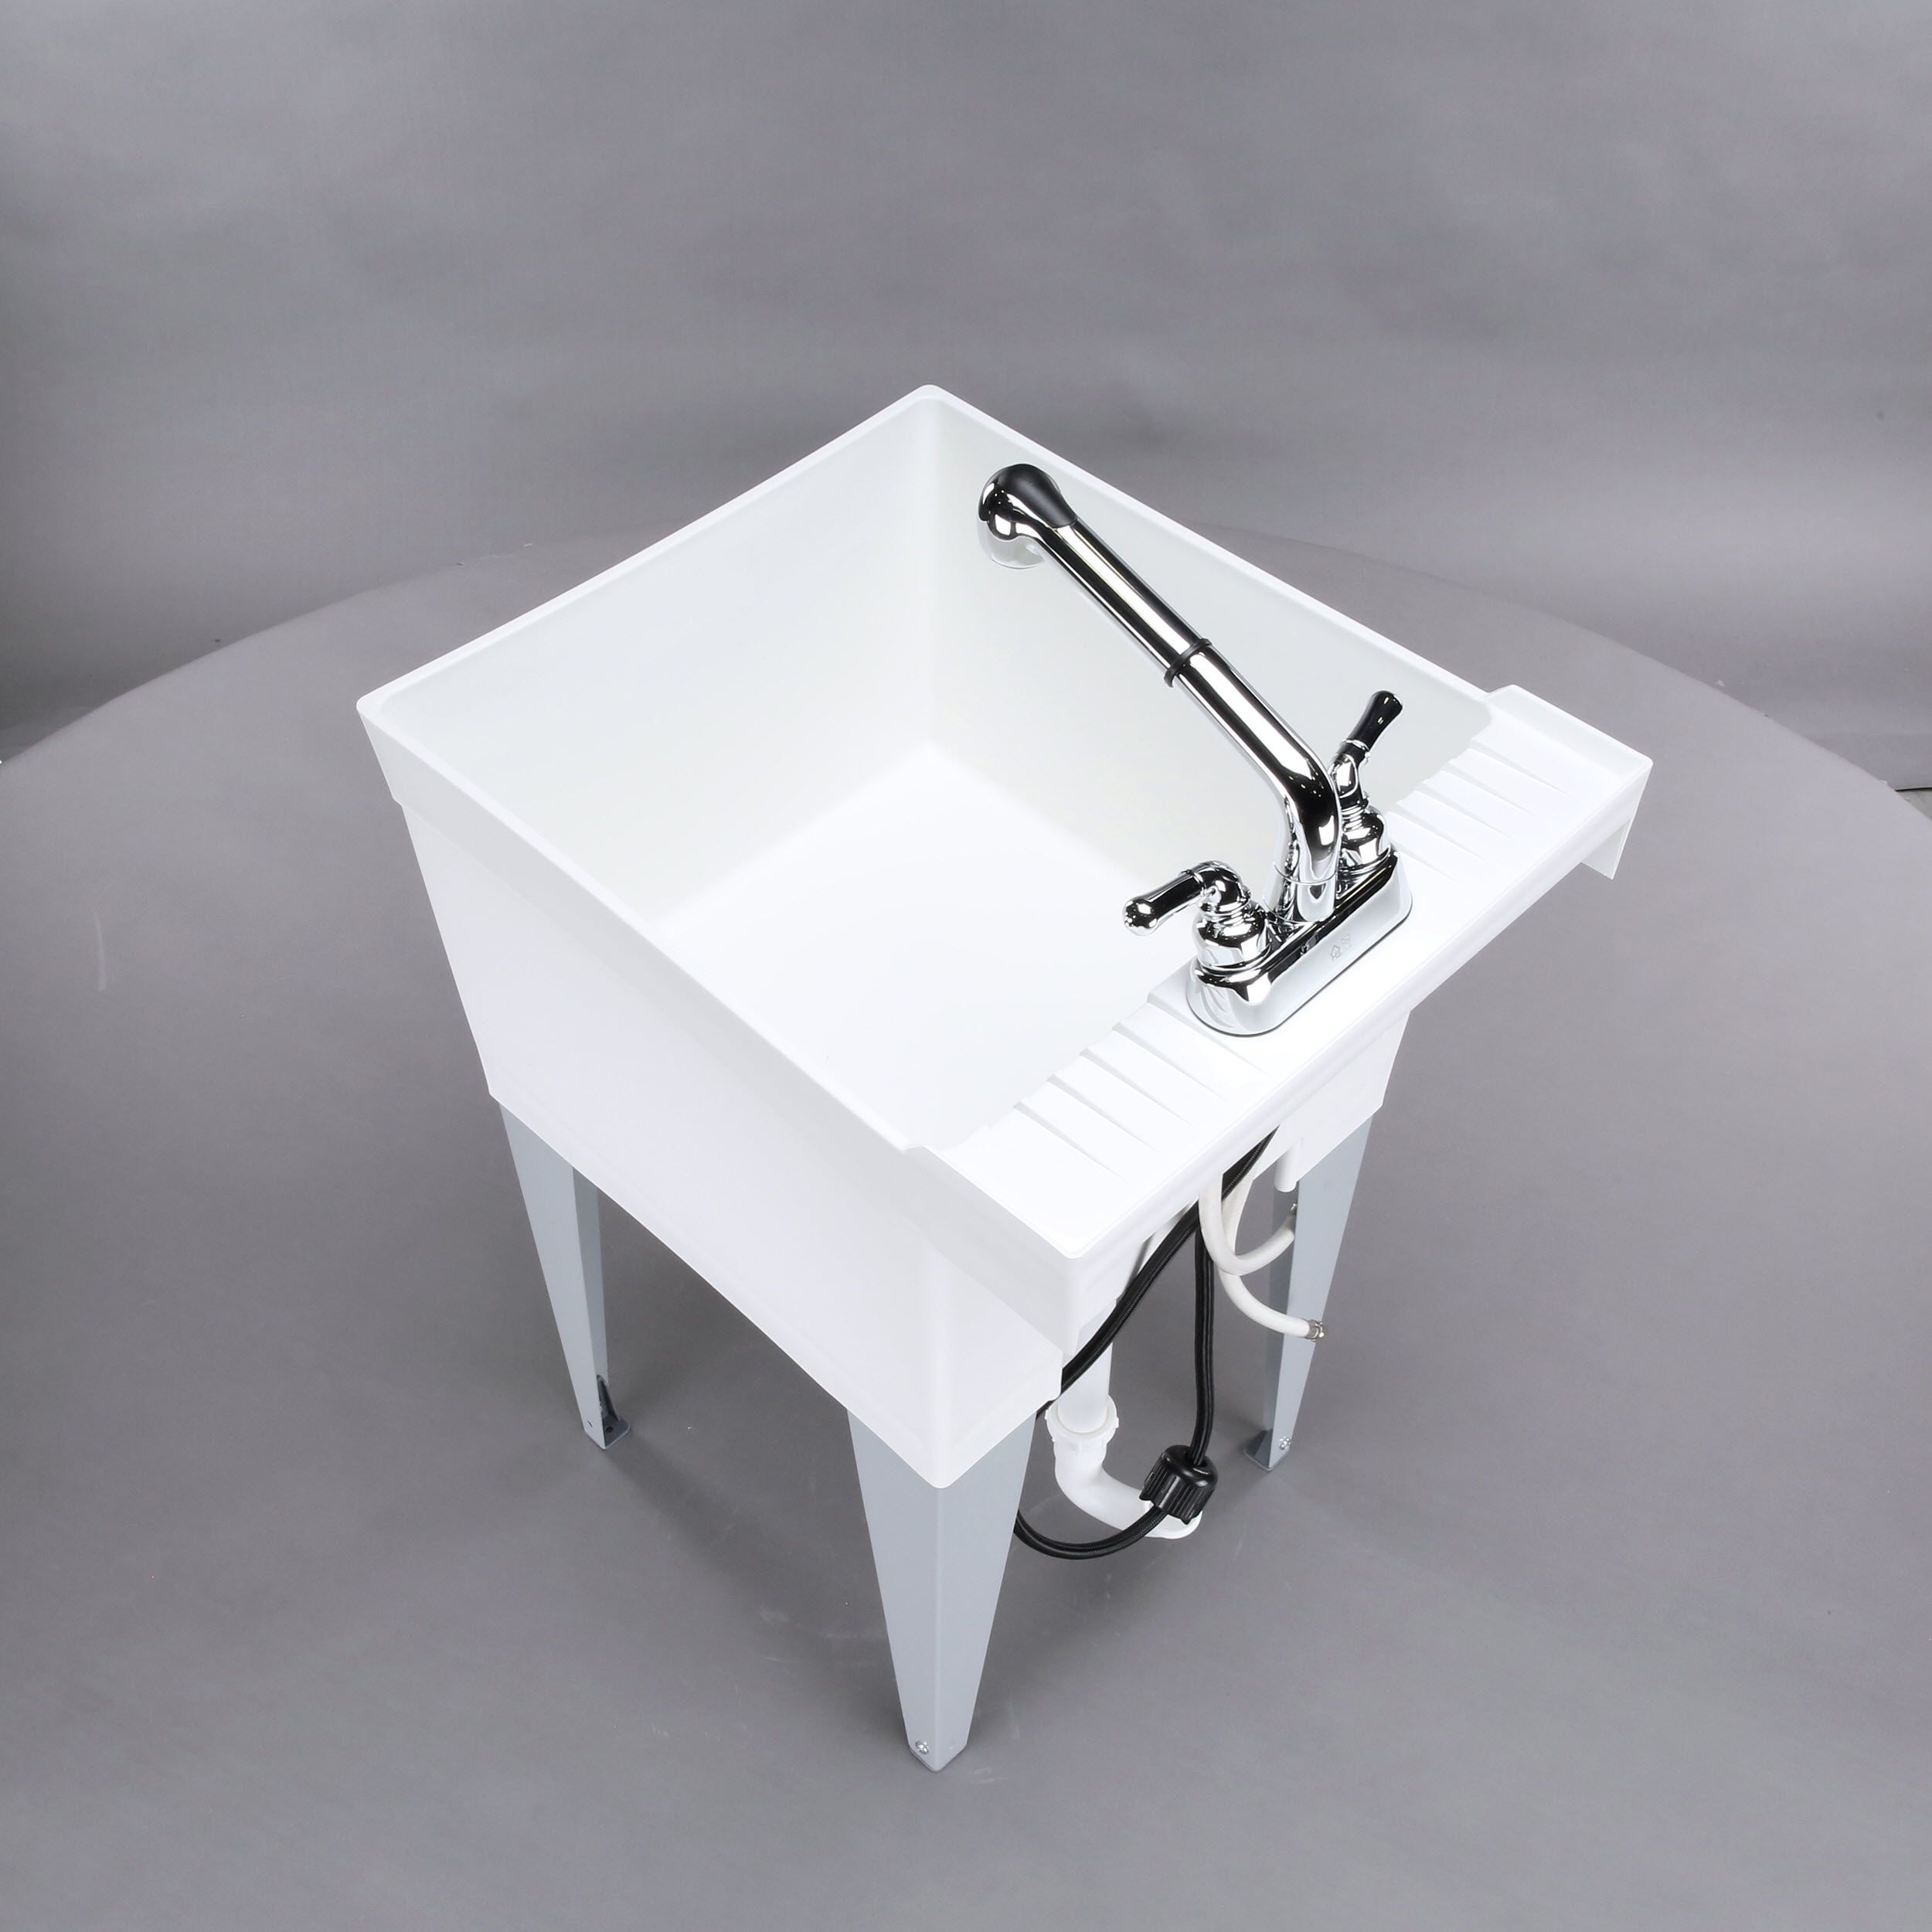 Details about   New Small Bar Single BOWL Inset Kitchen Laundry SINK TUB CM4 20L 405x355x160mm 